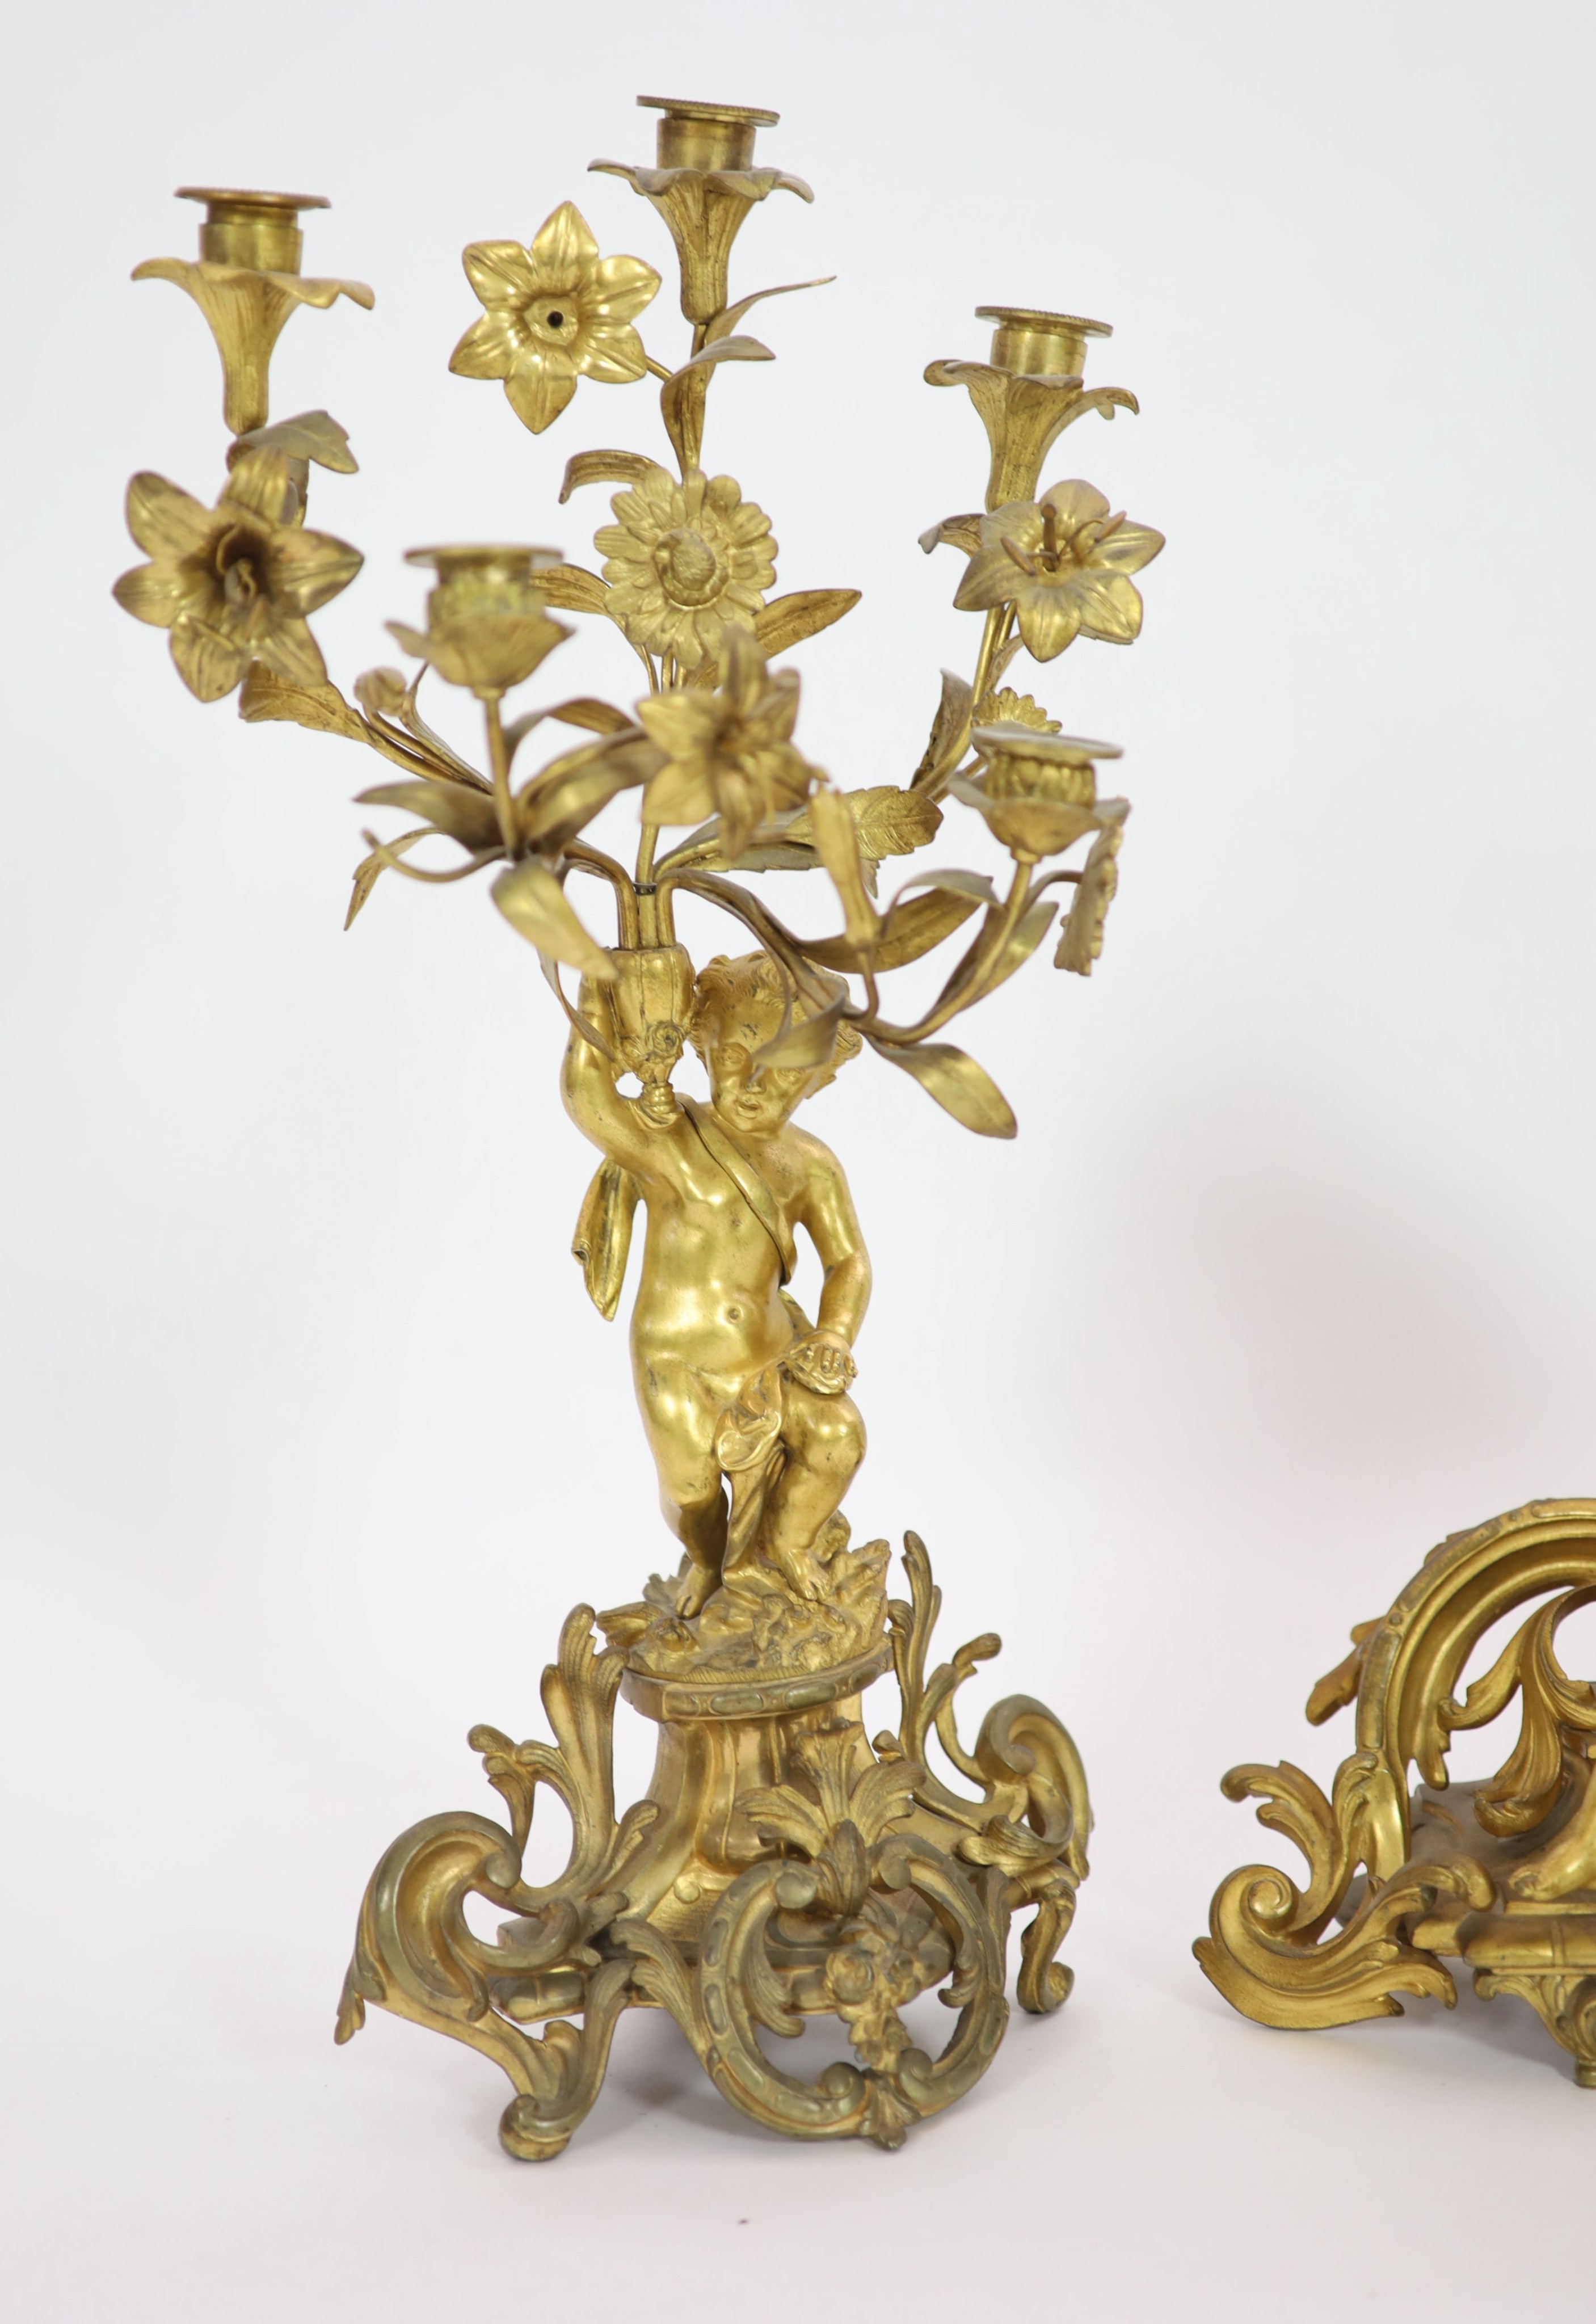 A 19th century Louis XV style ormolu clock garniture,the timepiece modelled with flowers and scrolls - Image 3 of 6